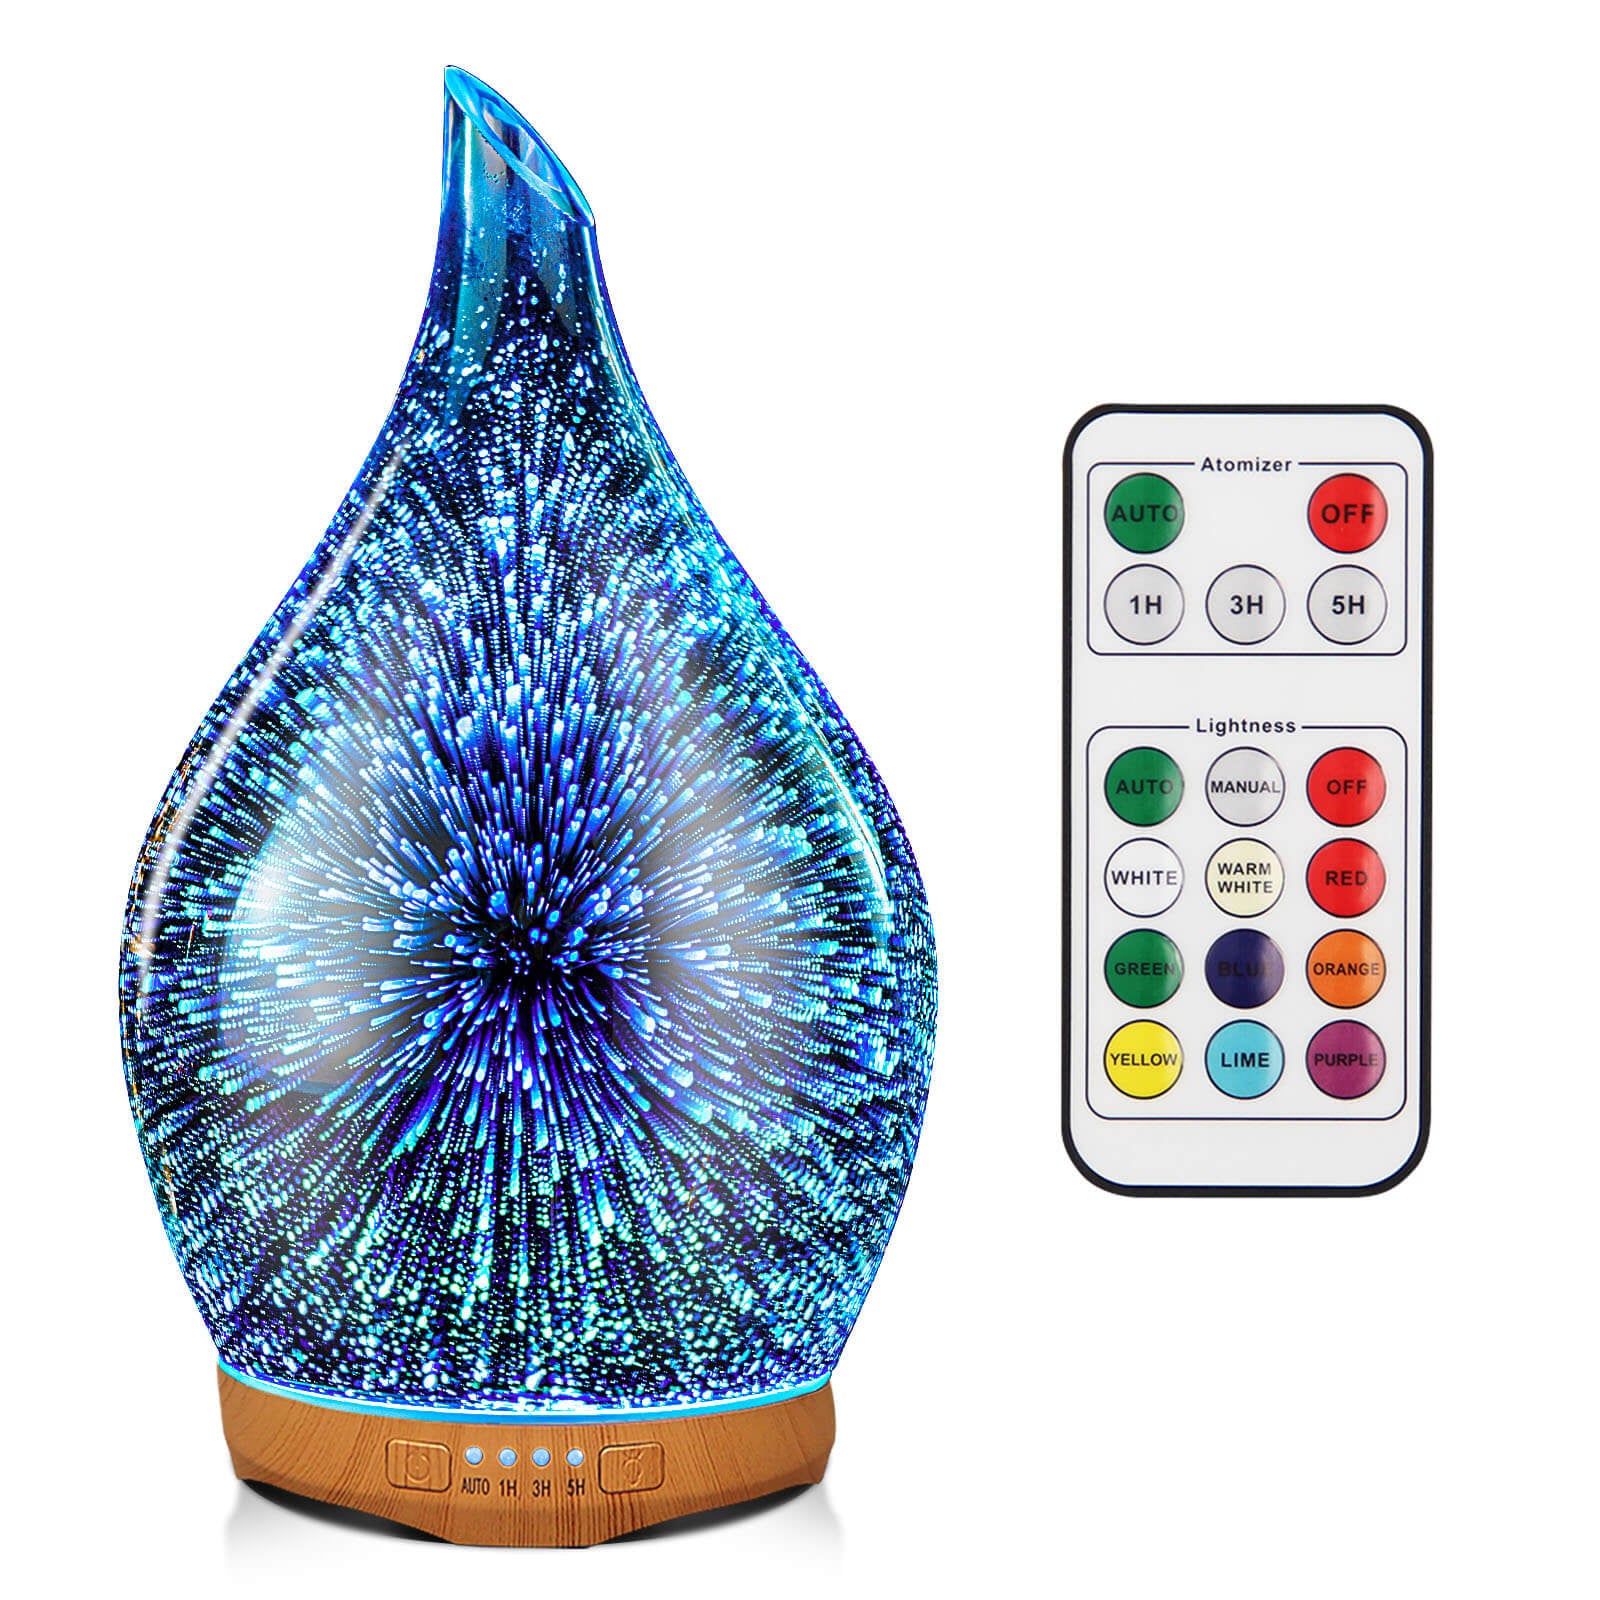  Diffusers for Essential Oils Large Room, 500ml Aromatherapy  Diffuser Cool Mist Humidifier with Remote Control,7 Colors Lights & 3 Mist  Mode Waterless Auto Off for Women Office Light Bule : Health